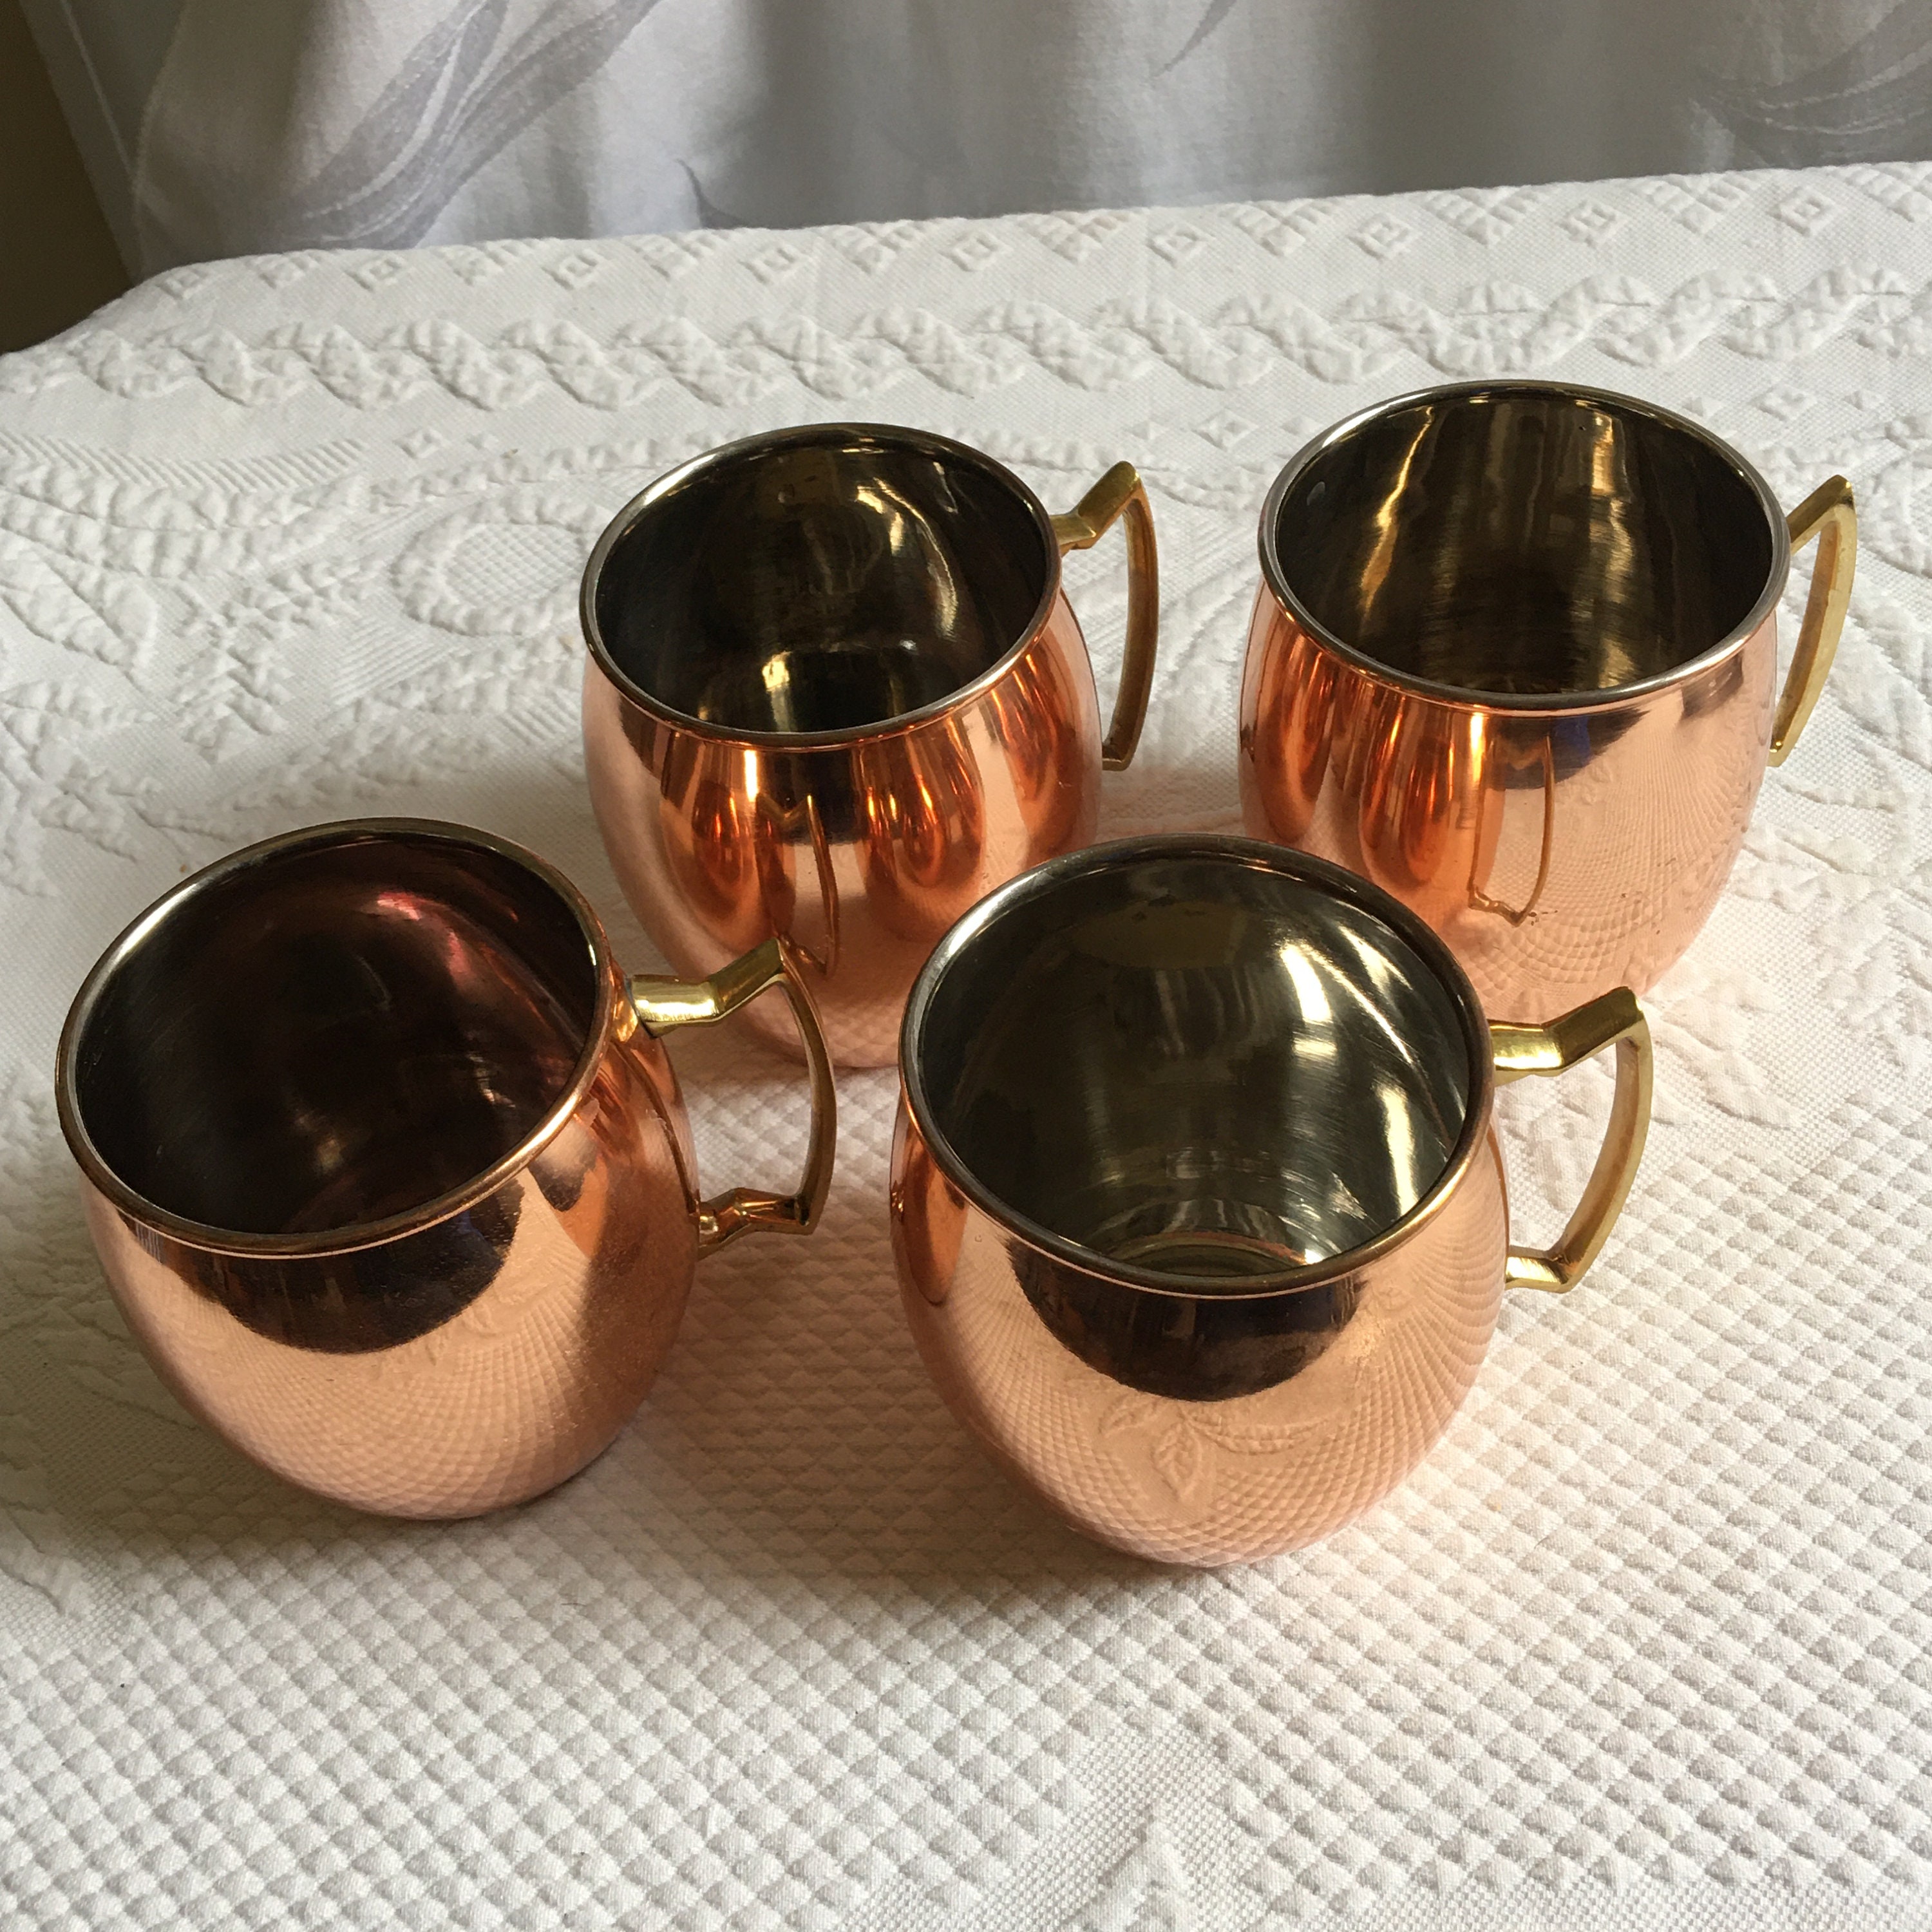 Tumbler Smooth: 14oz Copper Tumblers Set of 4 by Copper Mug Co.